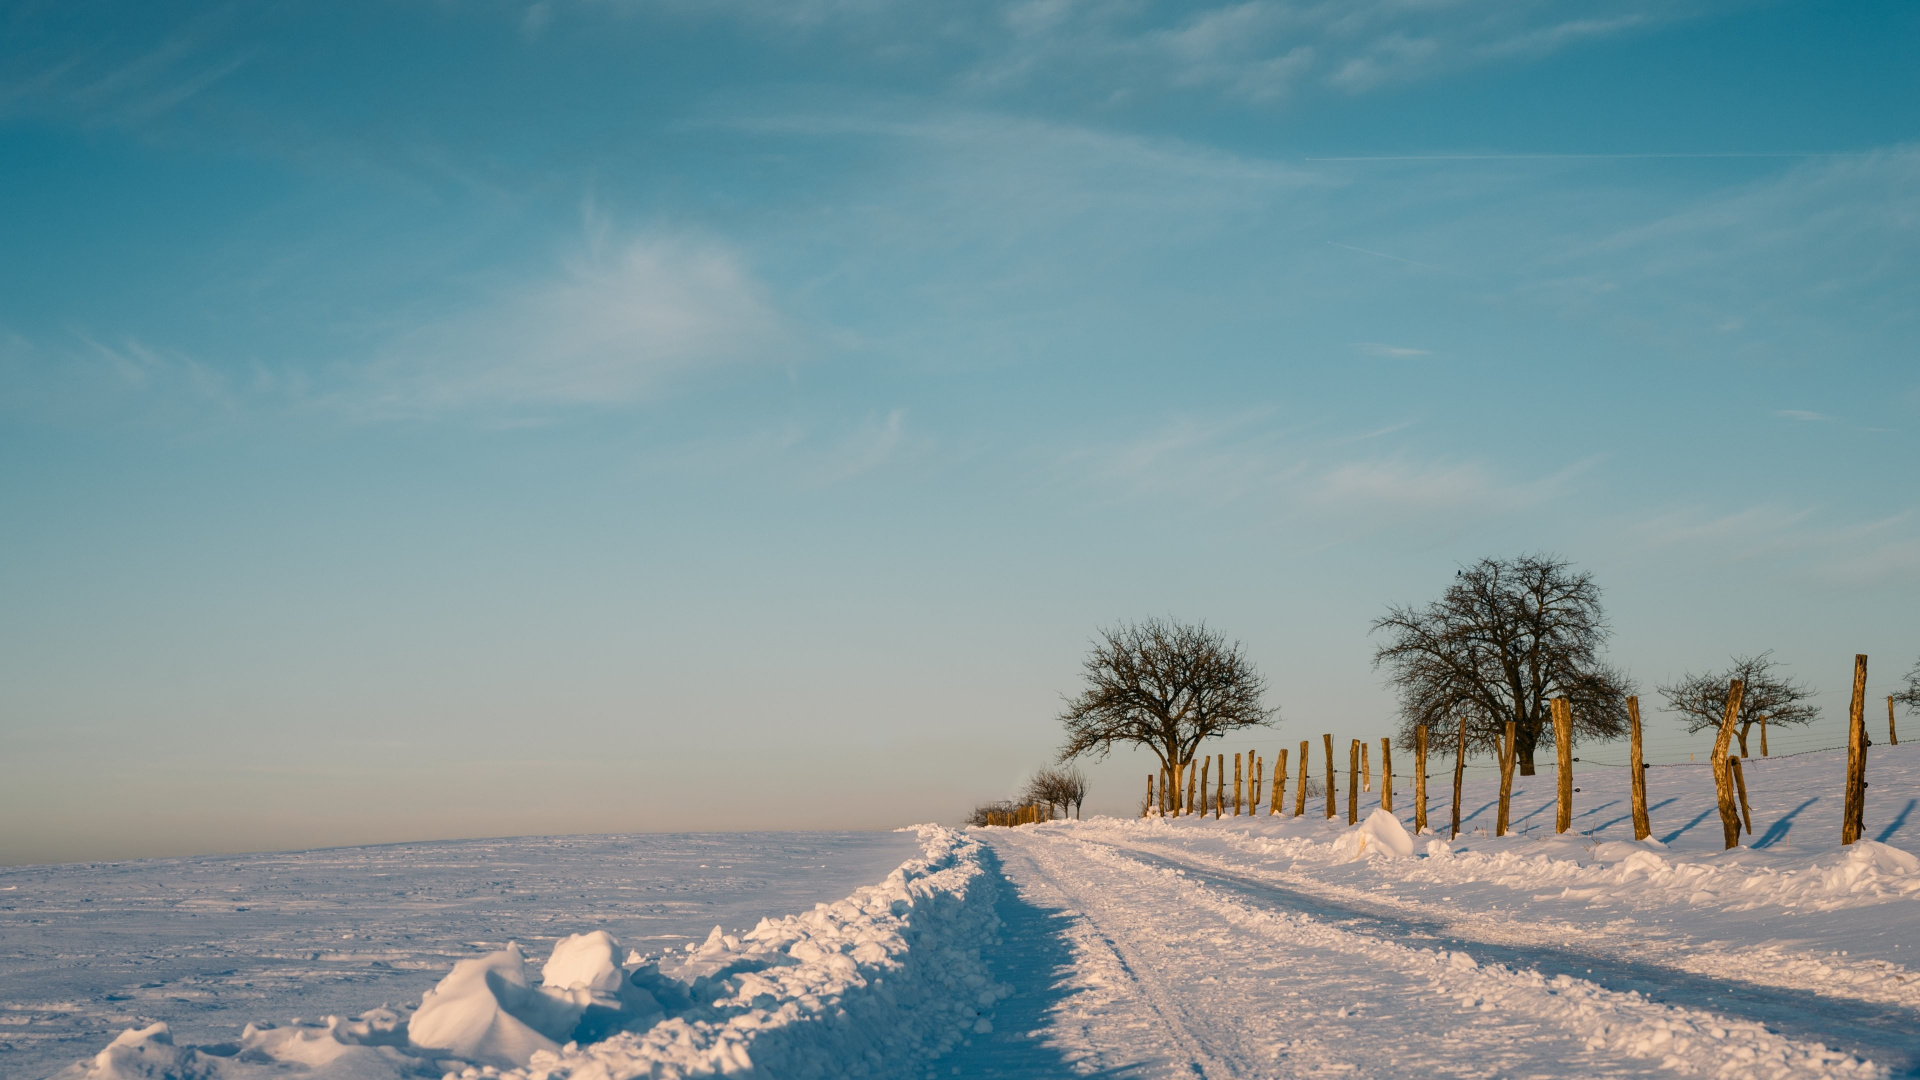 Bare Trees on Snow Covered Ground Under Blue Sky During Daytime. Wallpaper in 1920x1080 Resolution